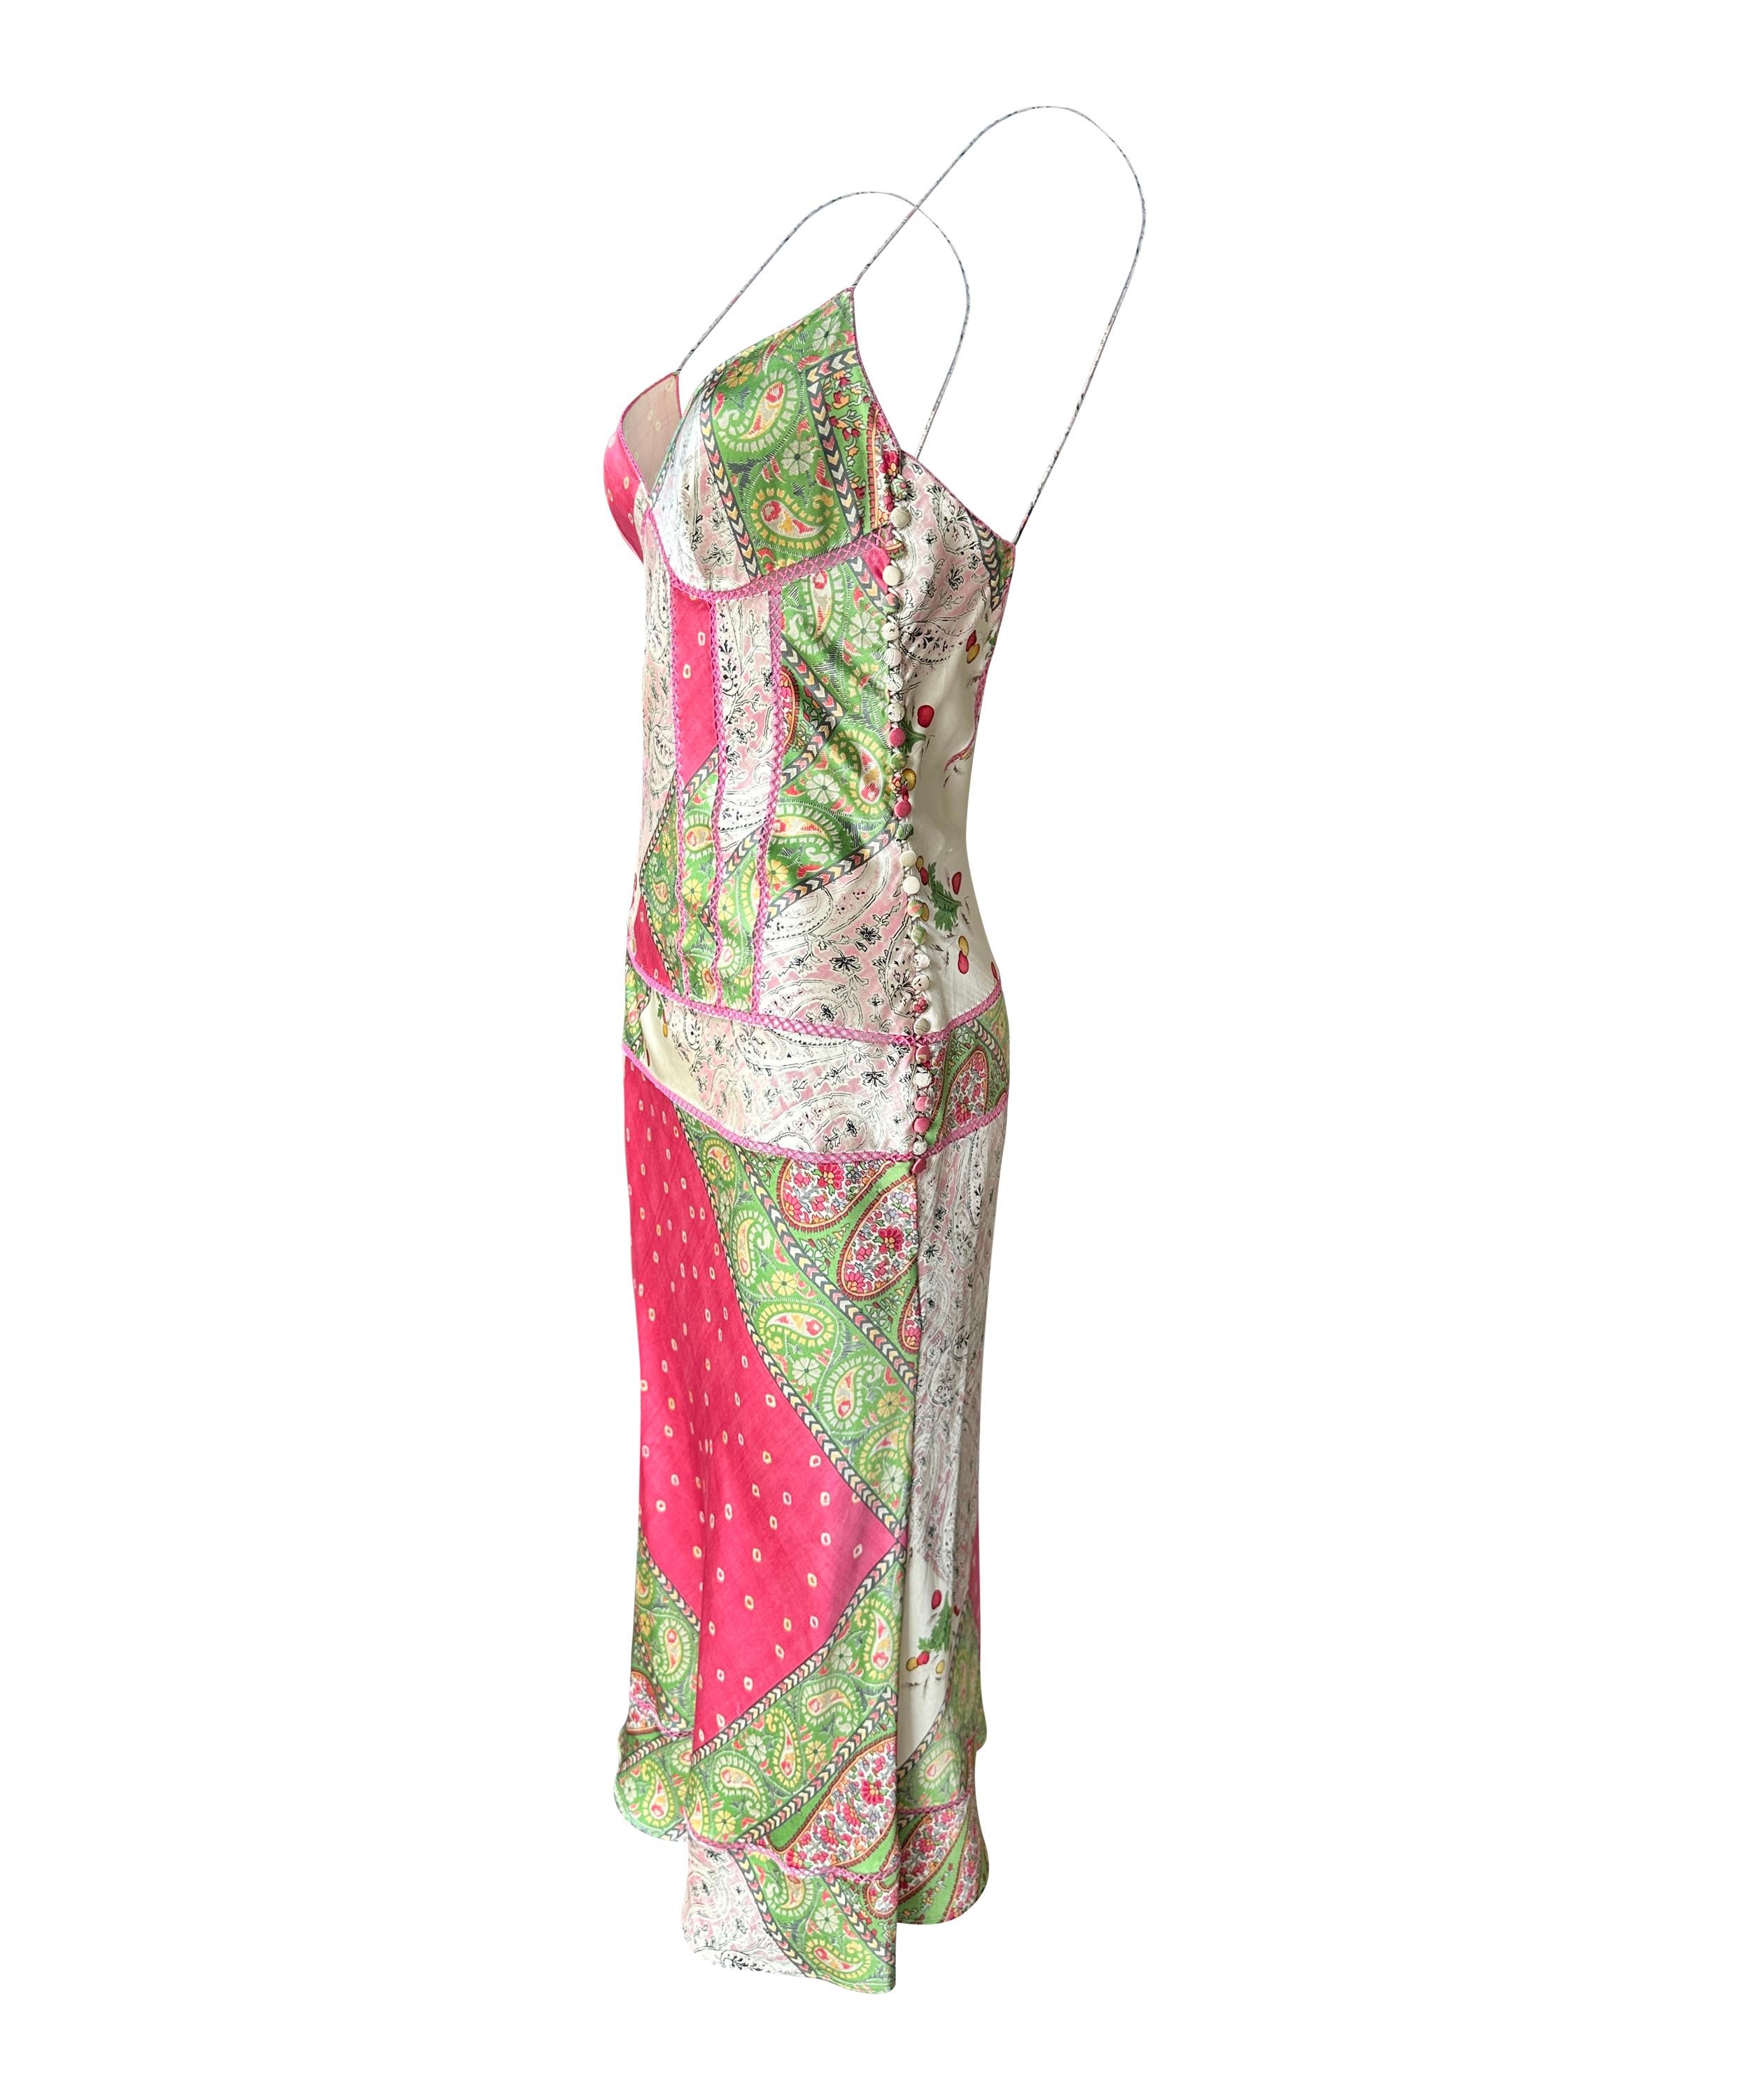 Vintage John Galliano for Christian Dior Fall Winter 2003 pink paisley slip dress. Features spaghetti straps, side button closure and midi length. In excellent vintage condition.

Size: Womens S

Condition: Pre-Owned Like New